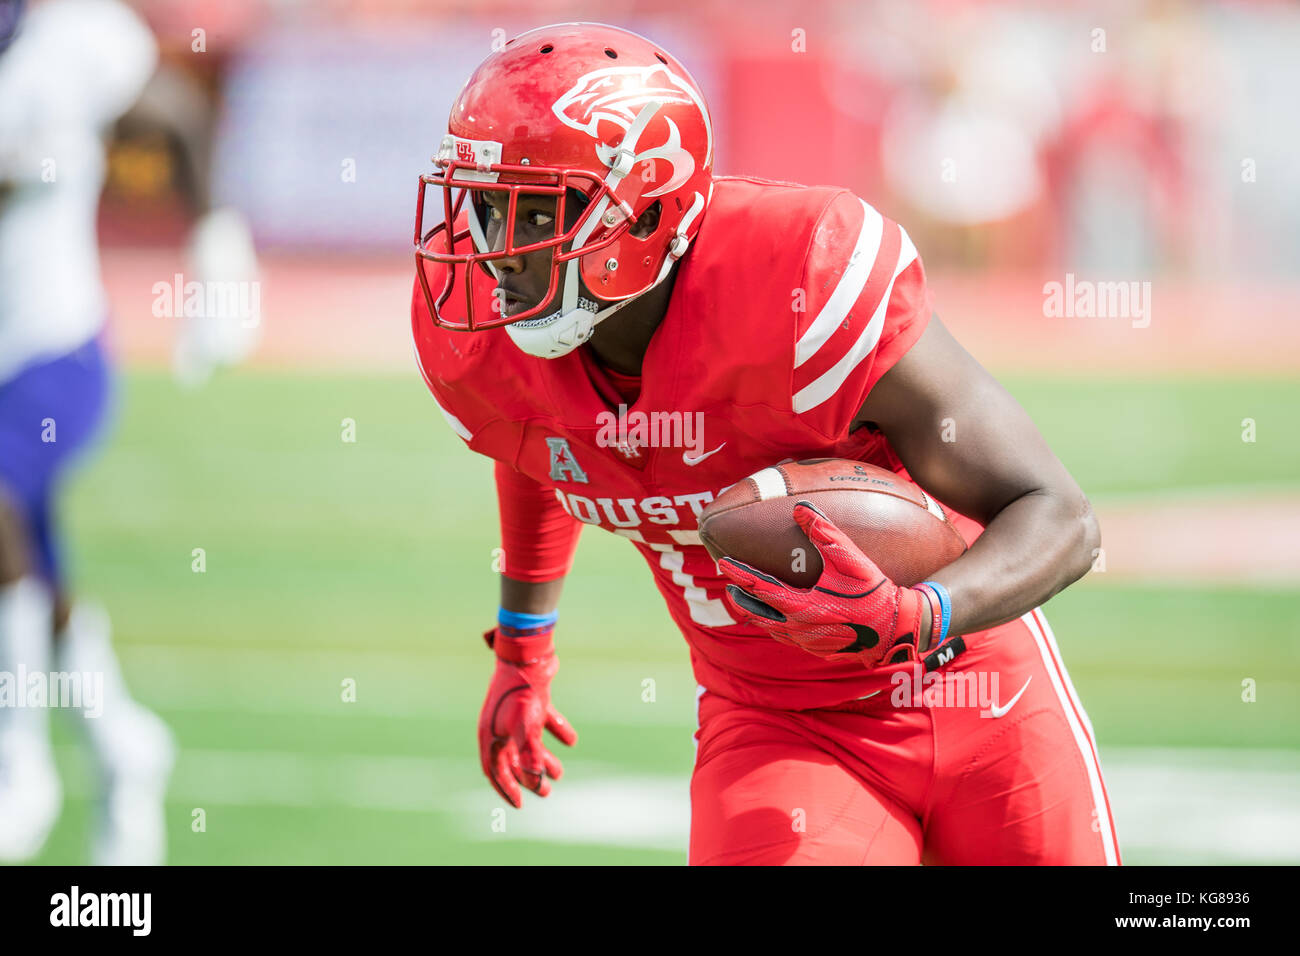 Houston, TX, USA. 4th Nov, 2017. Houston Cougars wide receiver Linell Bonner (15) runs for a touchdown after making a catch during the 3rd quarter of an NCAA football game between the East Carolina Pirates and the University of Houston Cougars at TDECU Stadium in Houston, TX. Houston won the game 52 to 27.Trask Smith/CSM/Alamy Live News Stock Photo